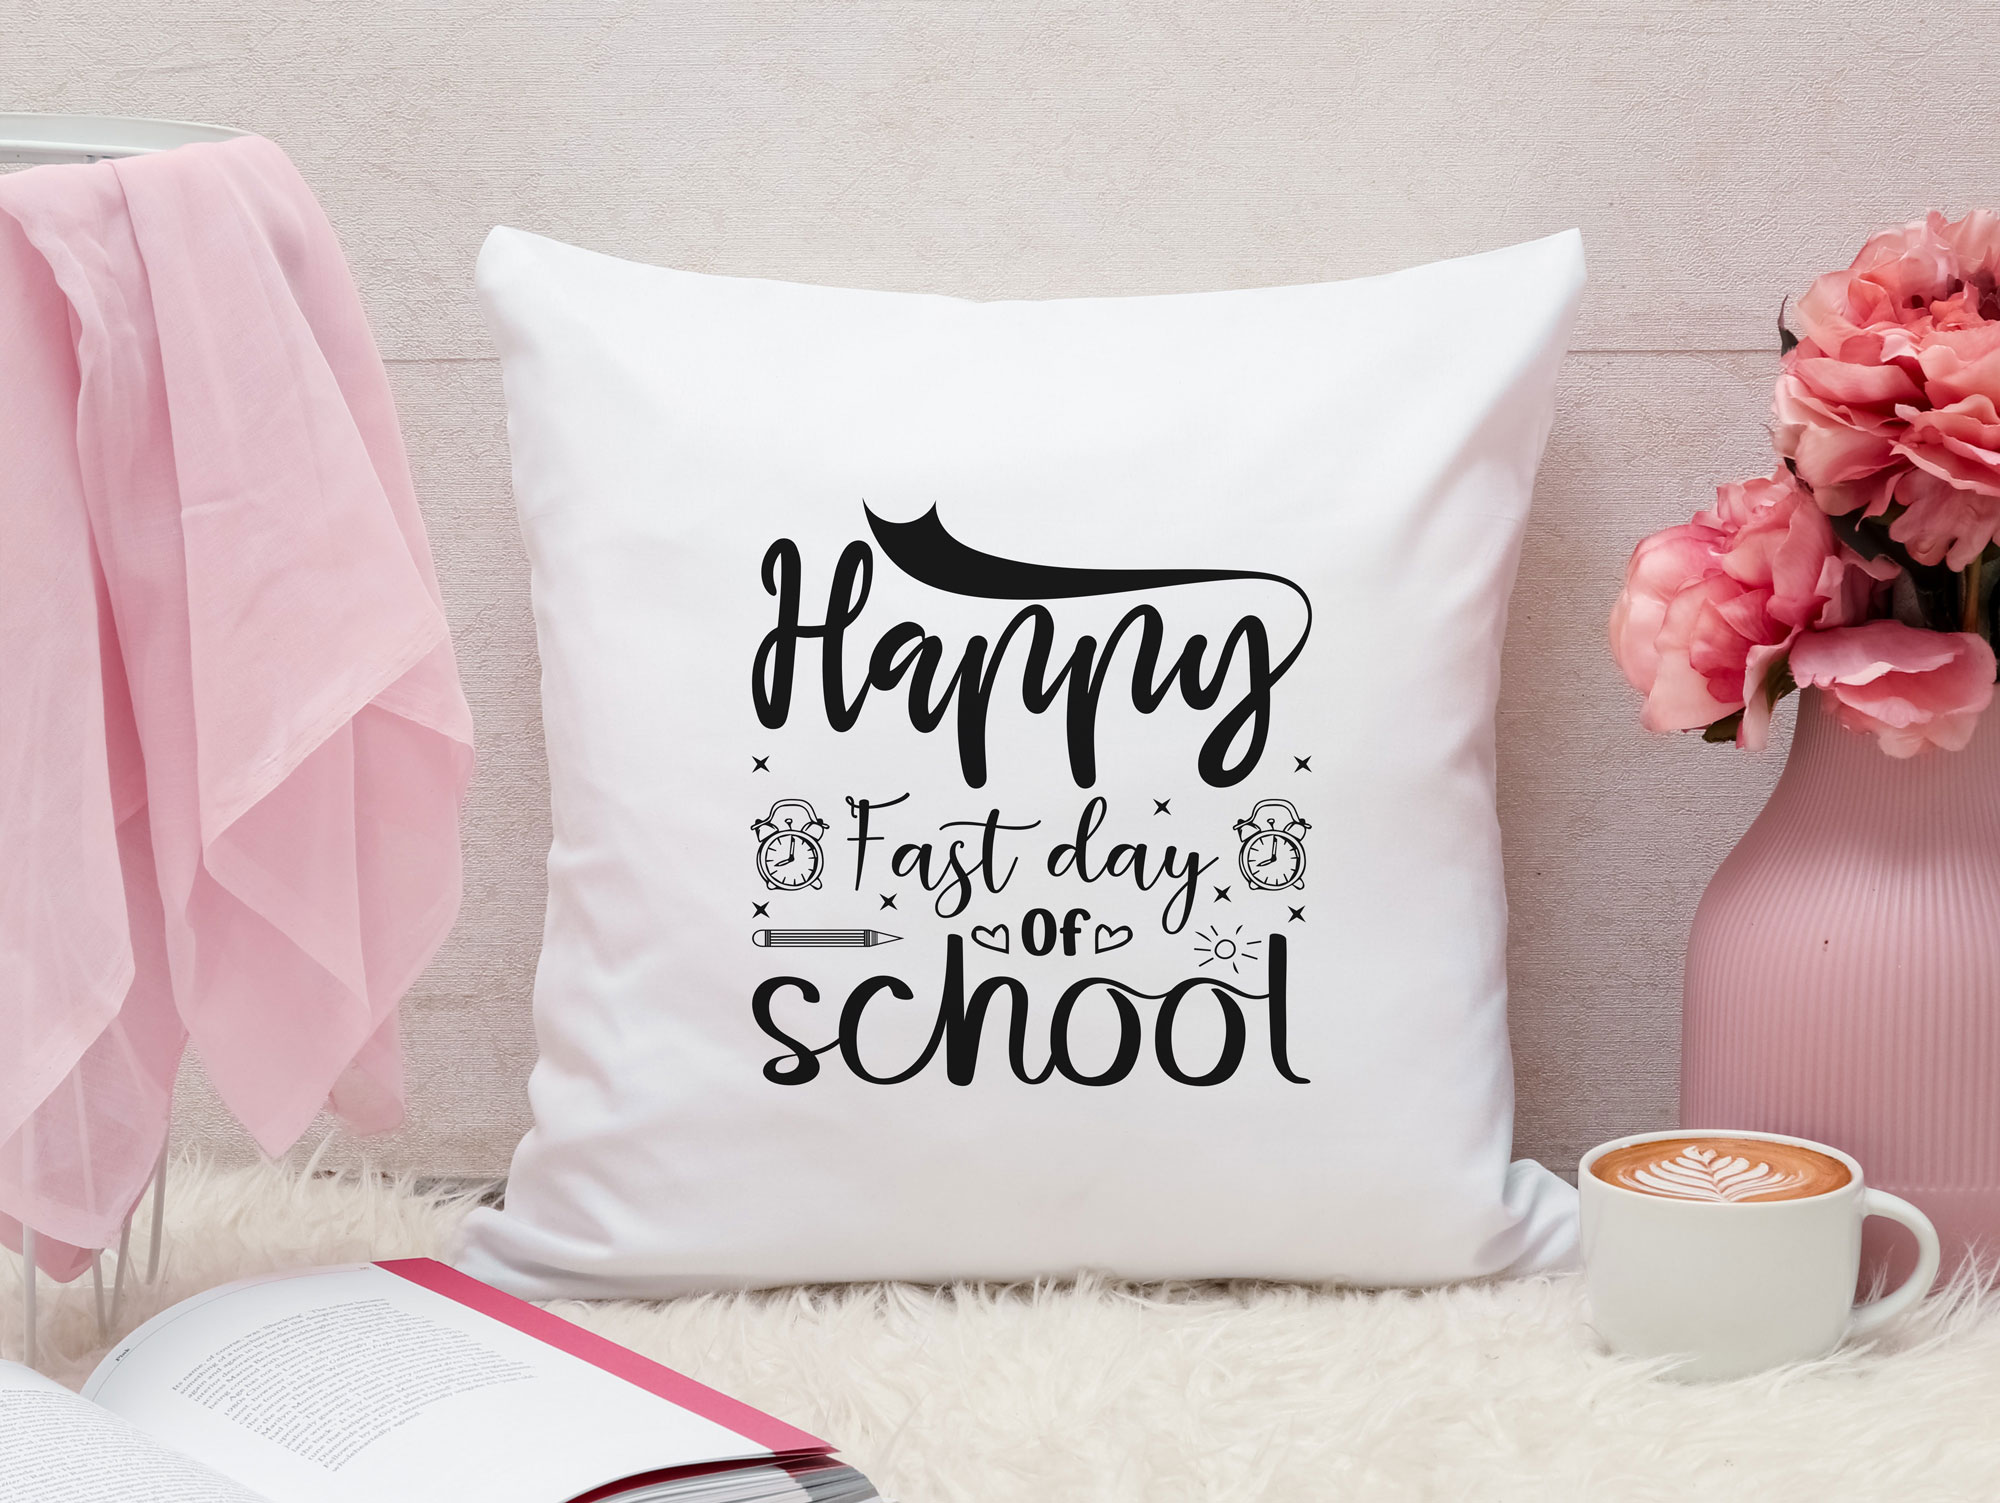 Image of a white pillow with a beautiful inscription Happy fast day of school